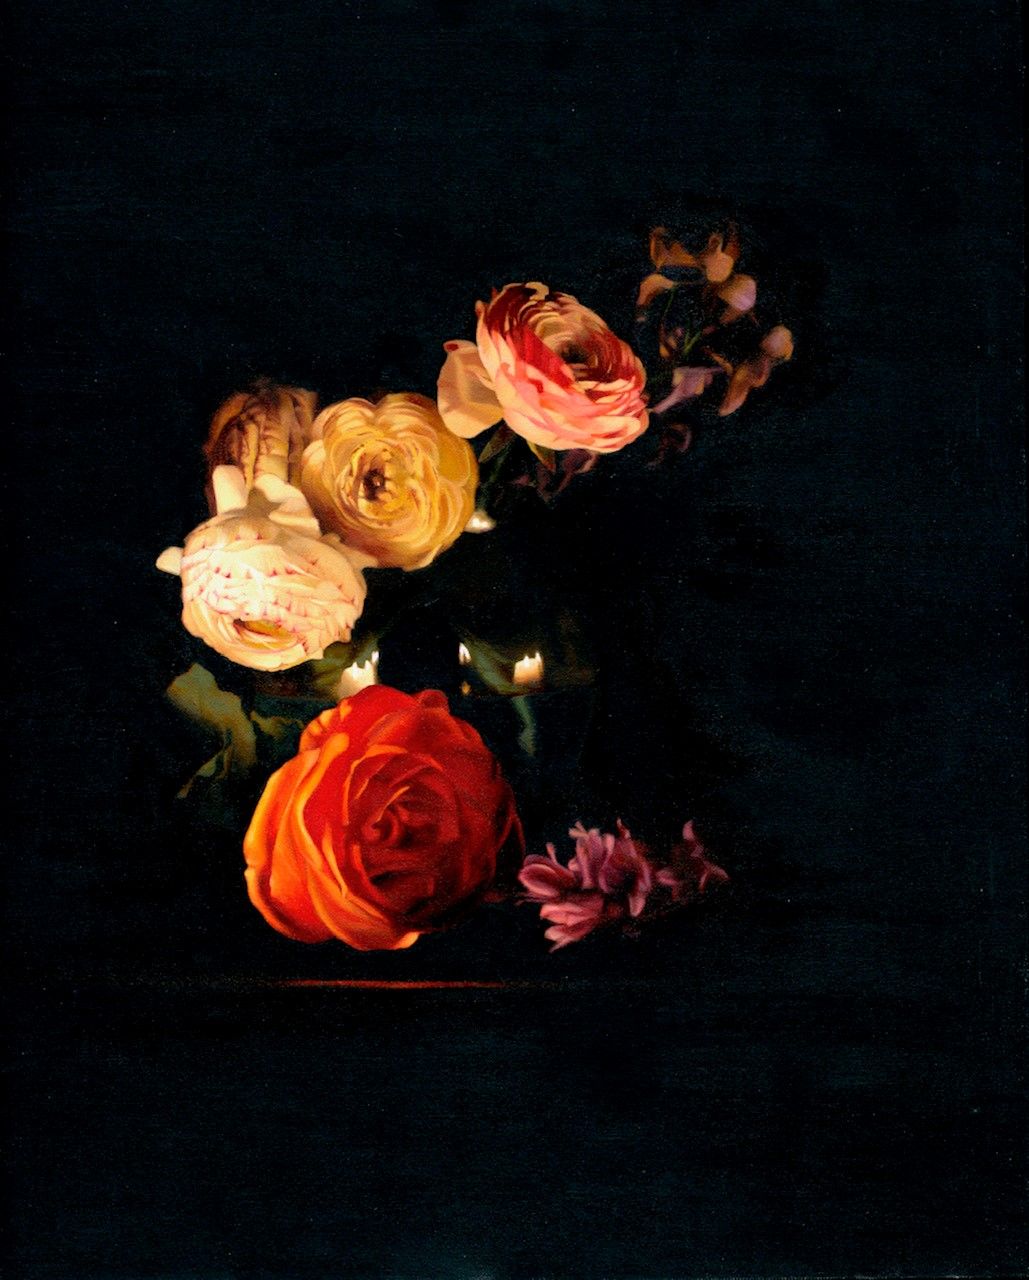 Flowers by Candlelight II by Chris Polunin